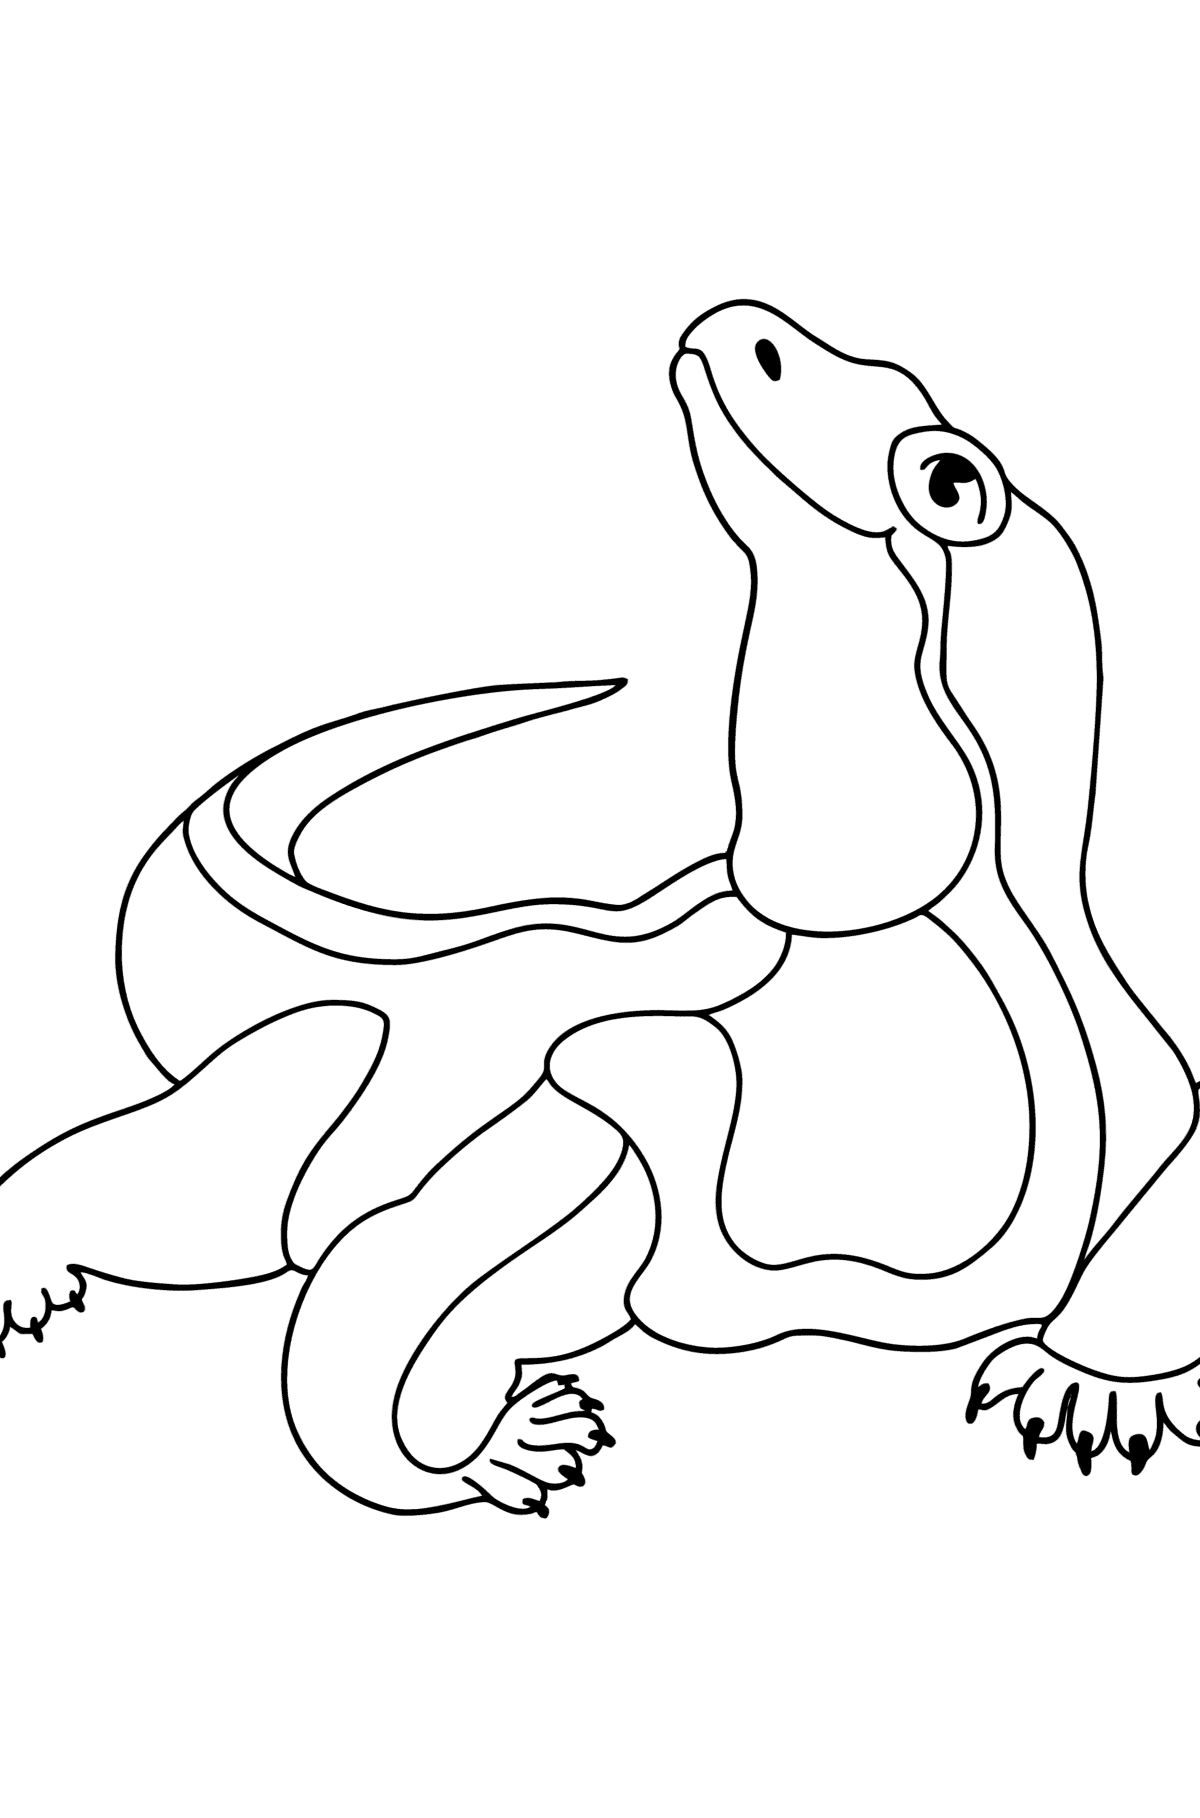 Monitor lizard сoloring page - Coloring Pages for Kids